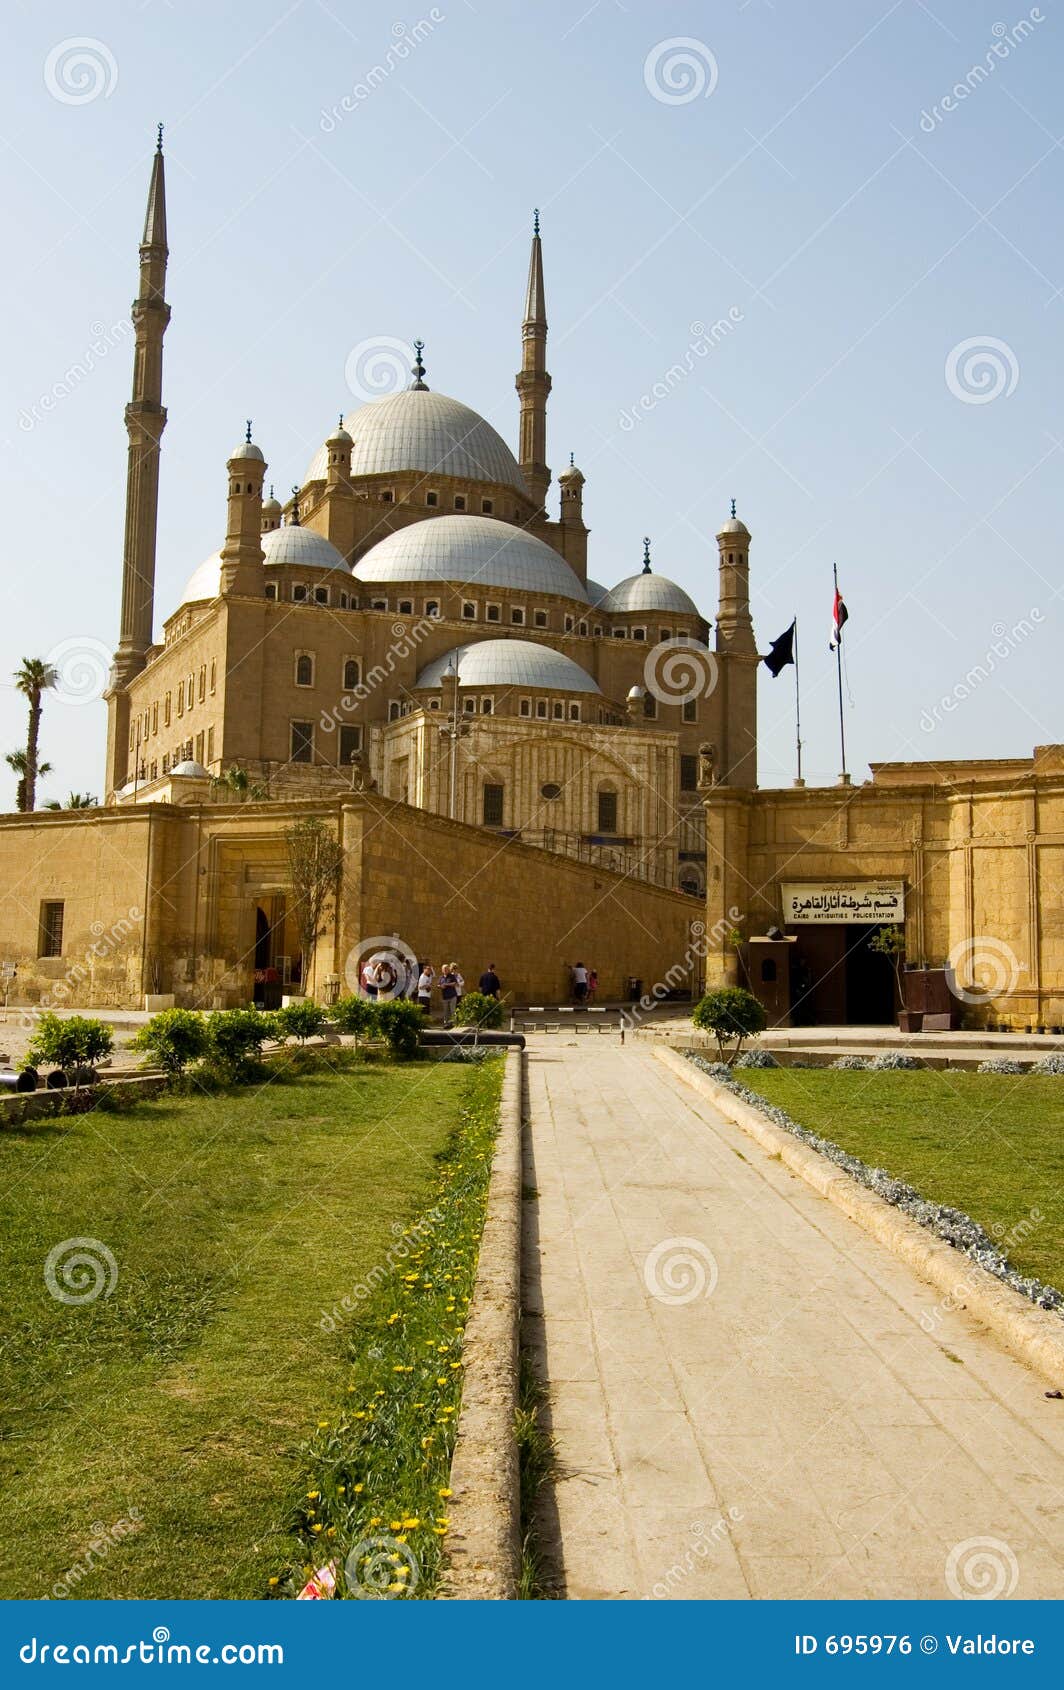 mosque of mohamad ali